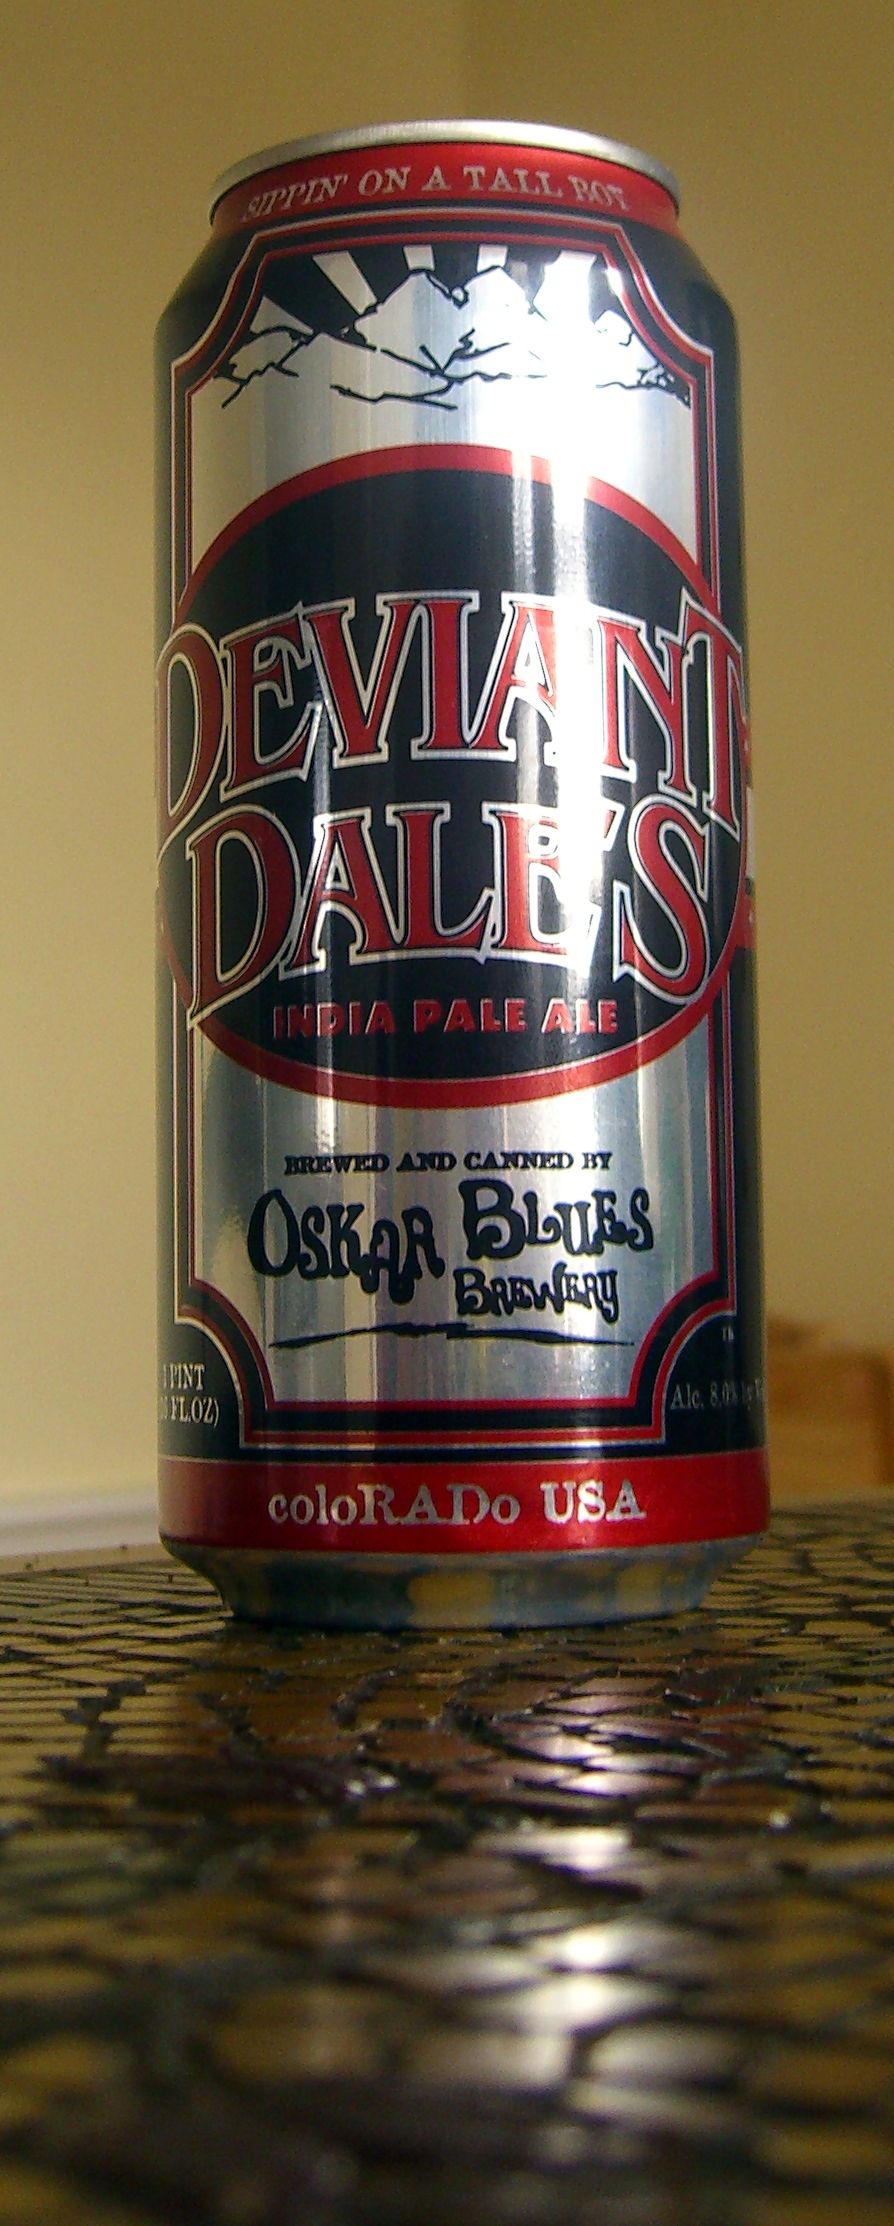 the can of devilain dalvers beer is on a tiled surface